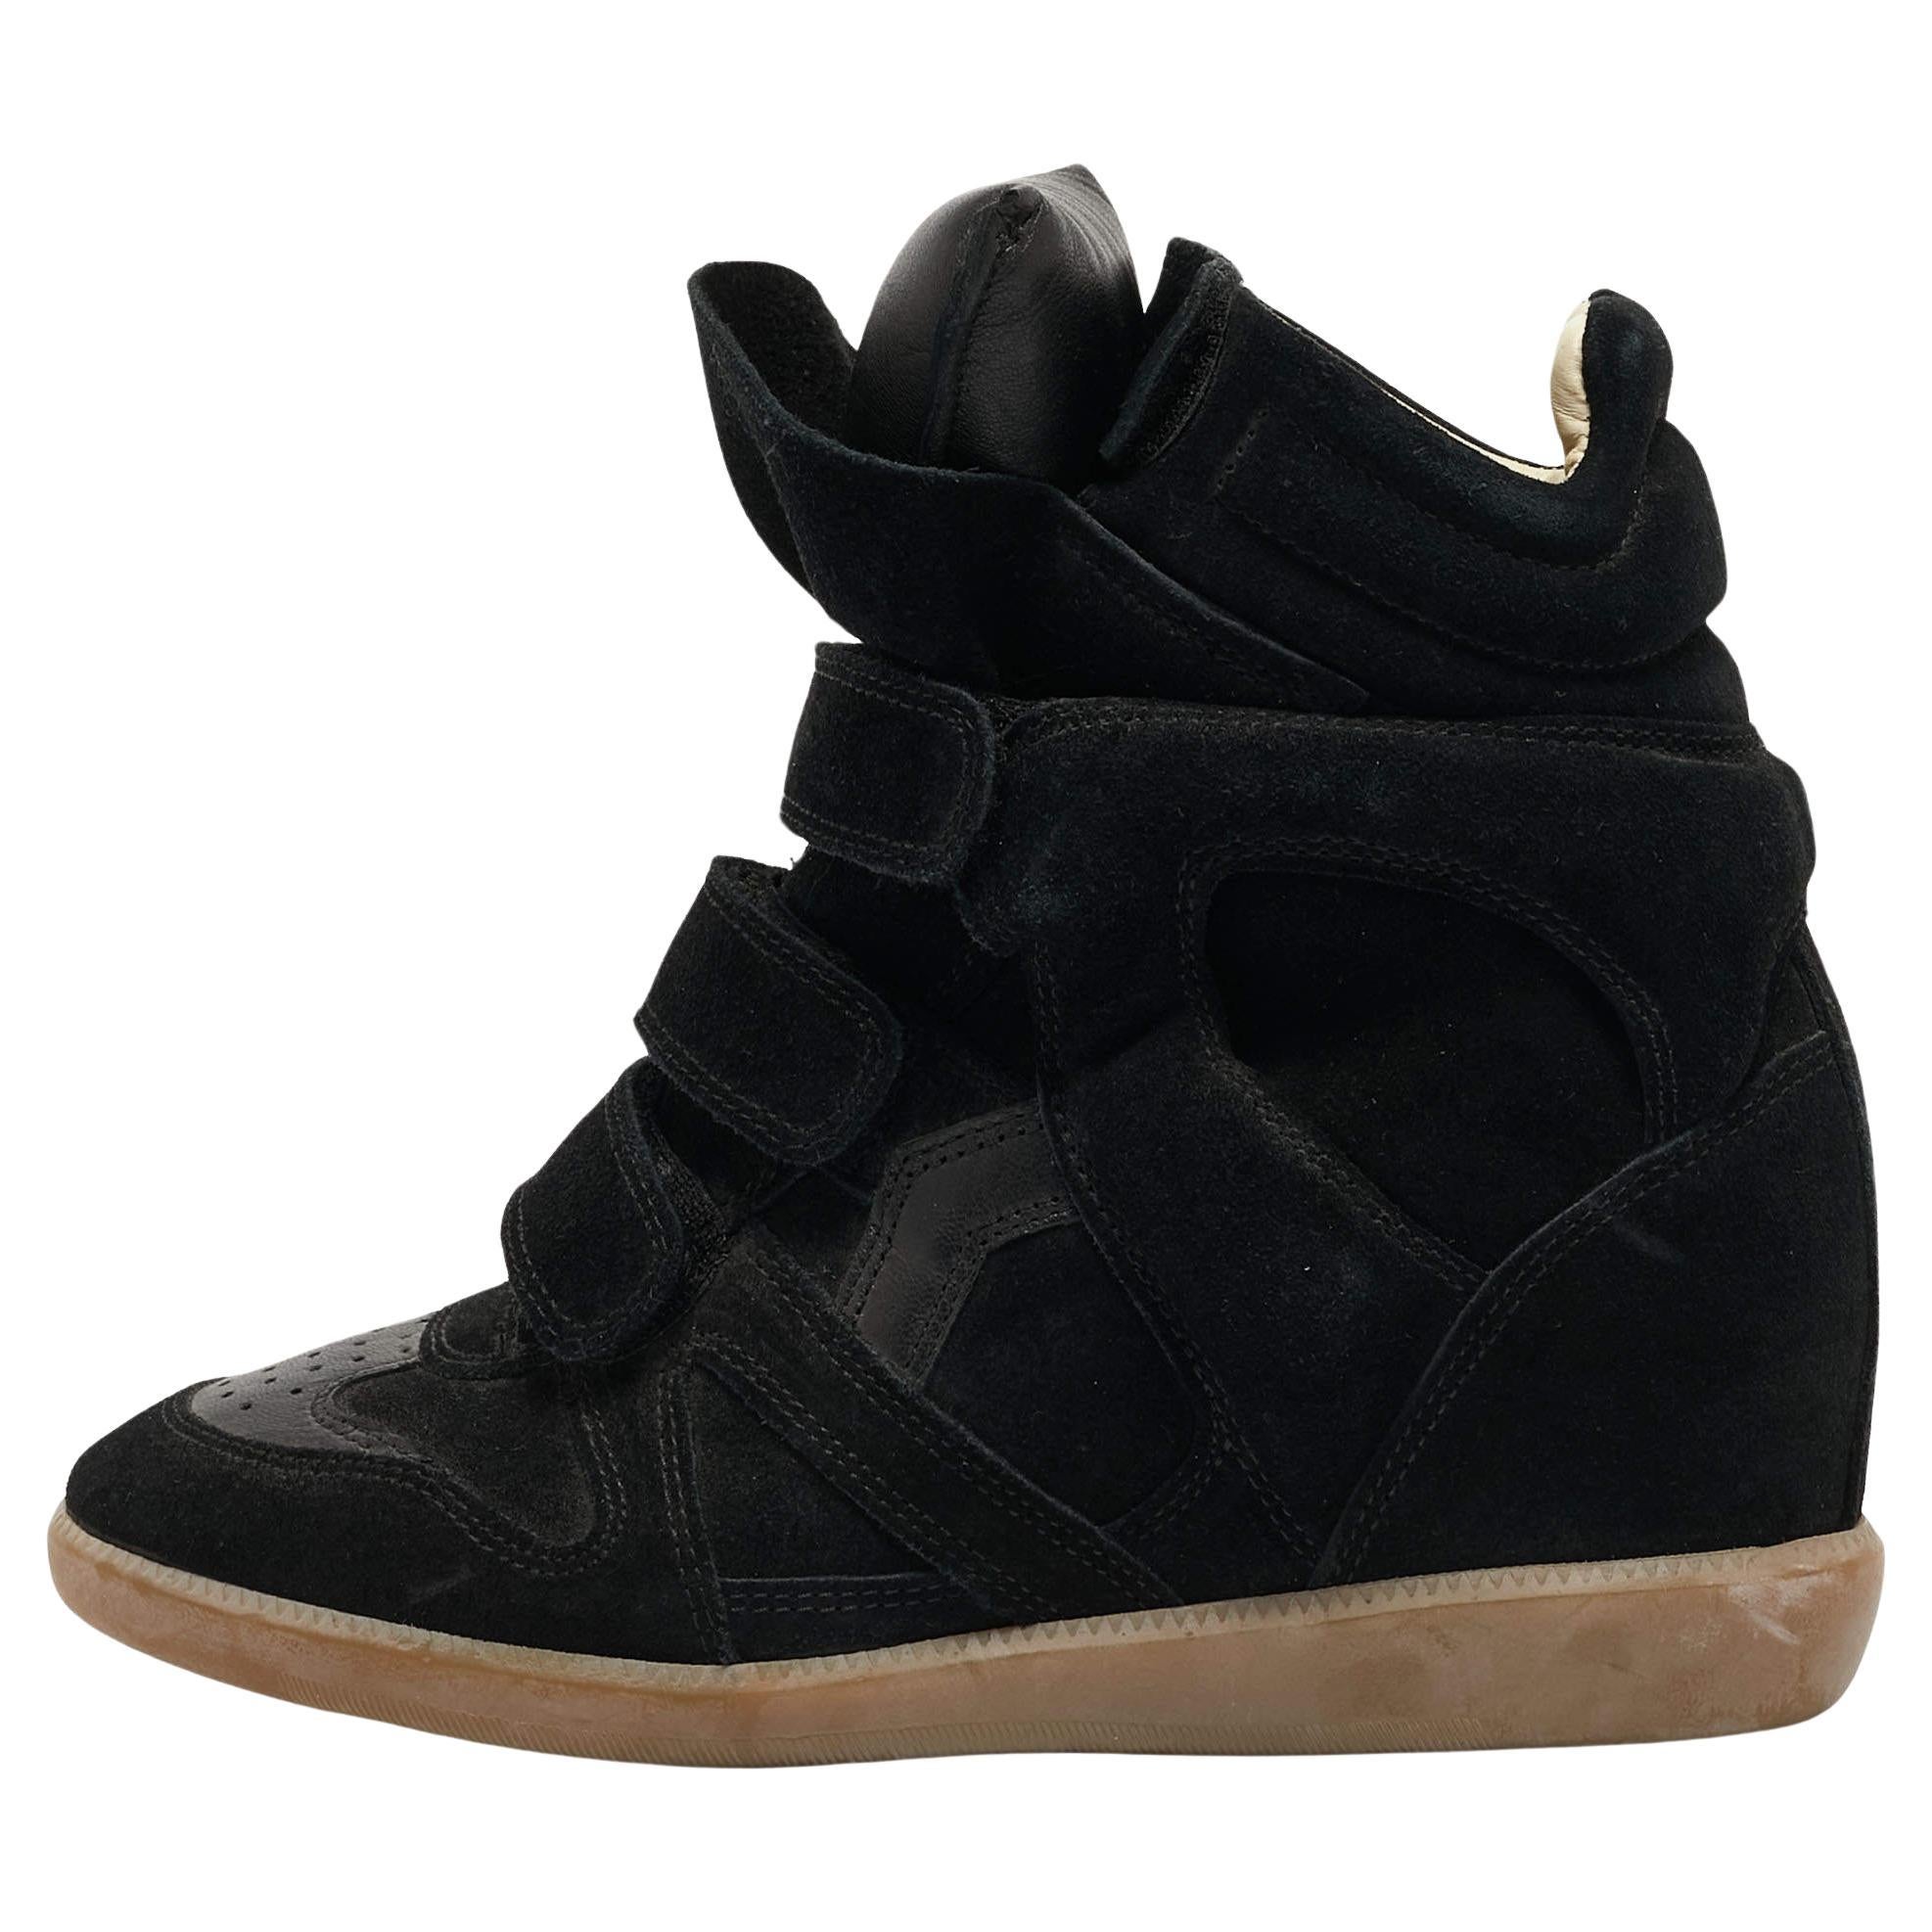 Isabel Marant Black Leather and Suede Wedge Sneakers Size 37 For Sale